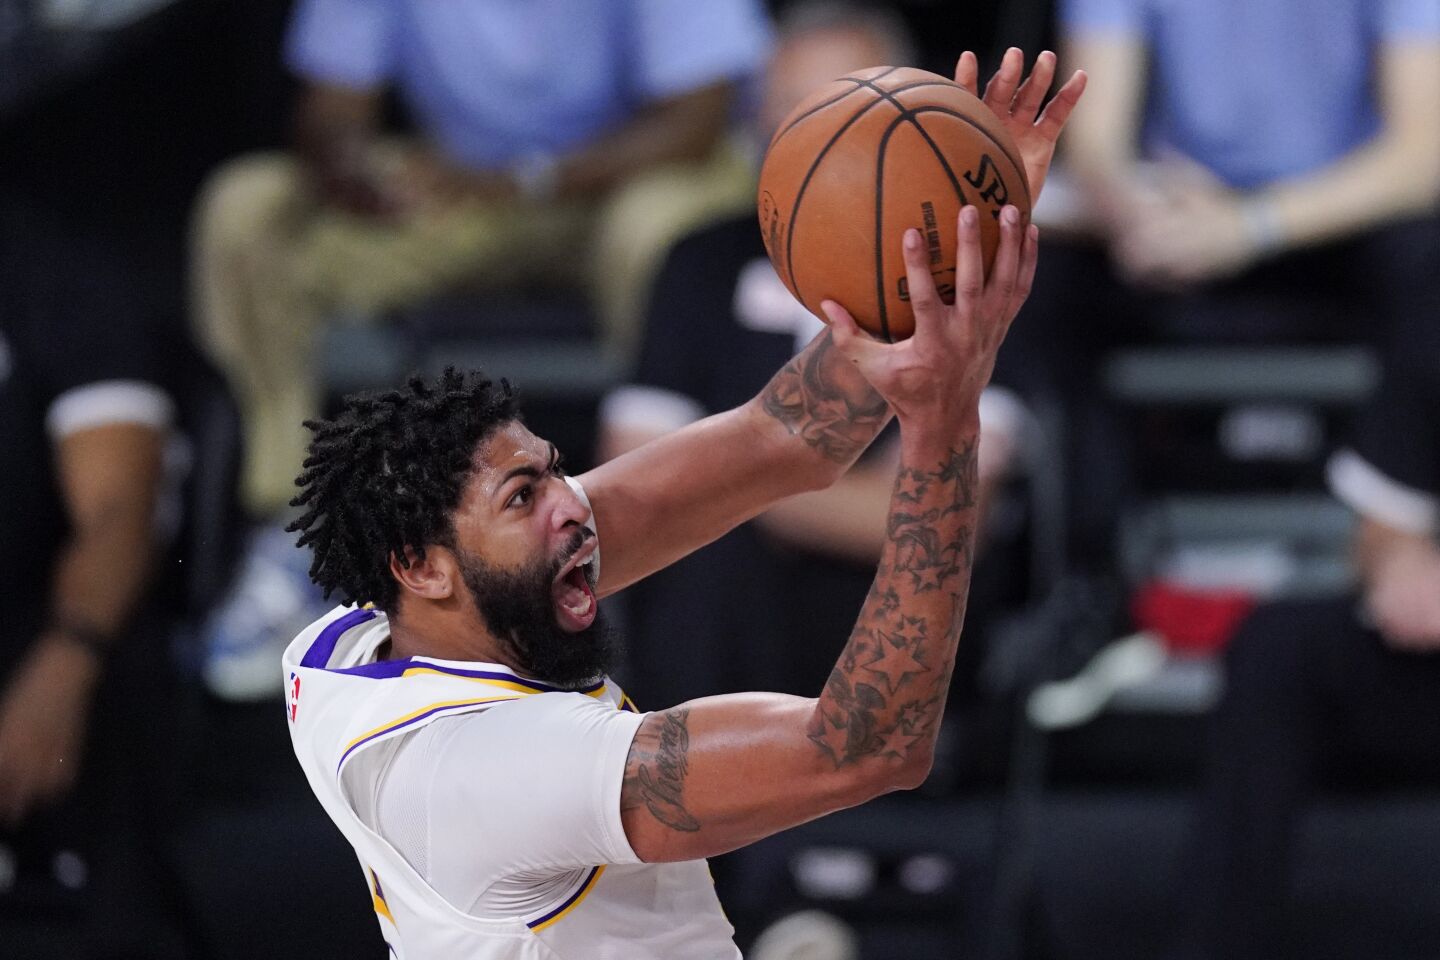 Lakers forward Anthony Davis drives to the basket during the second half Saturday.